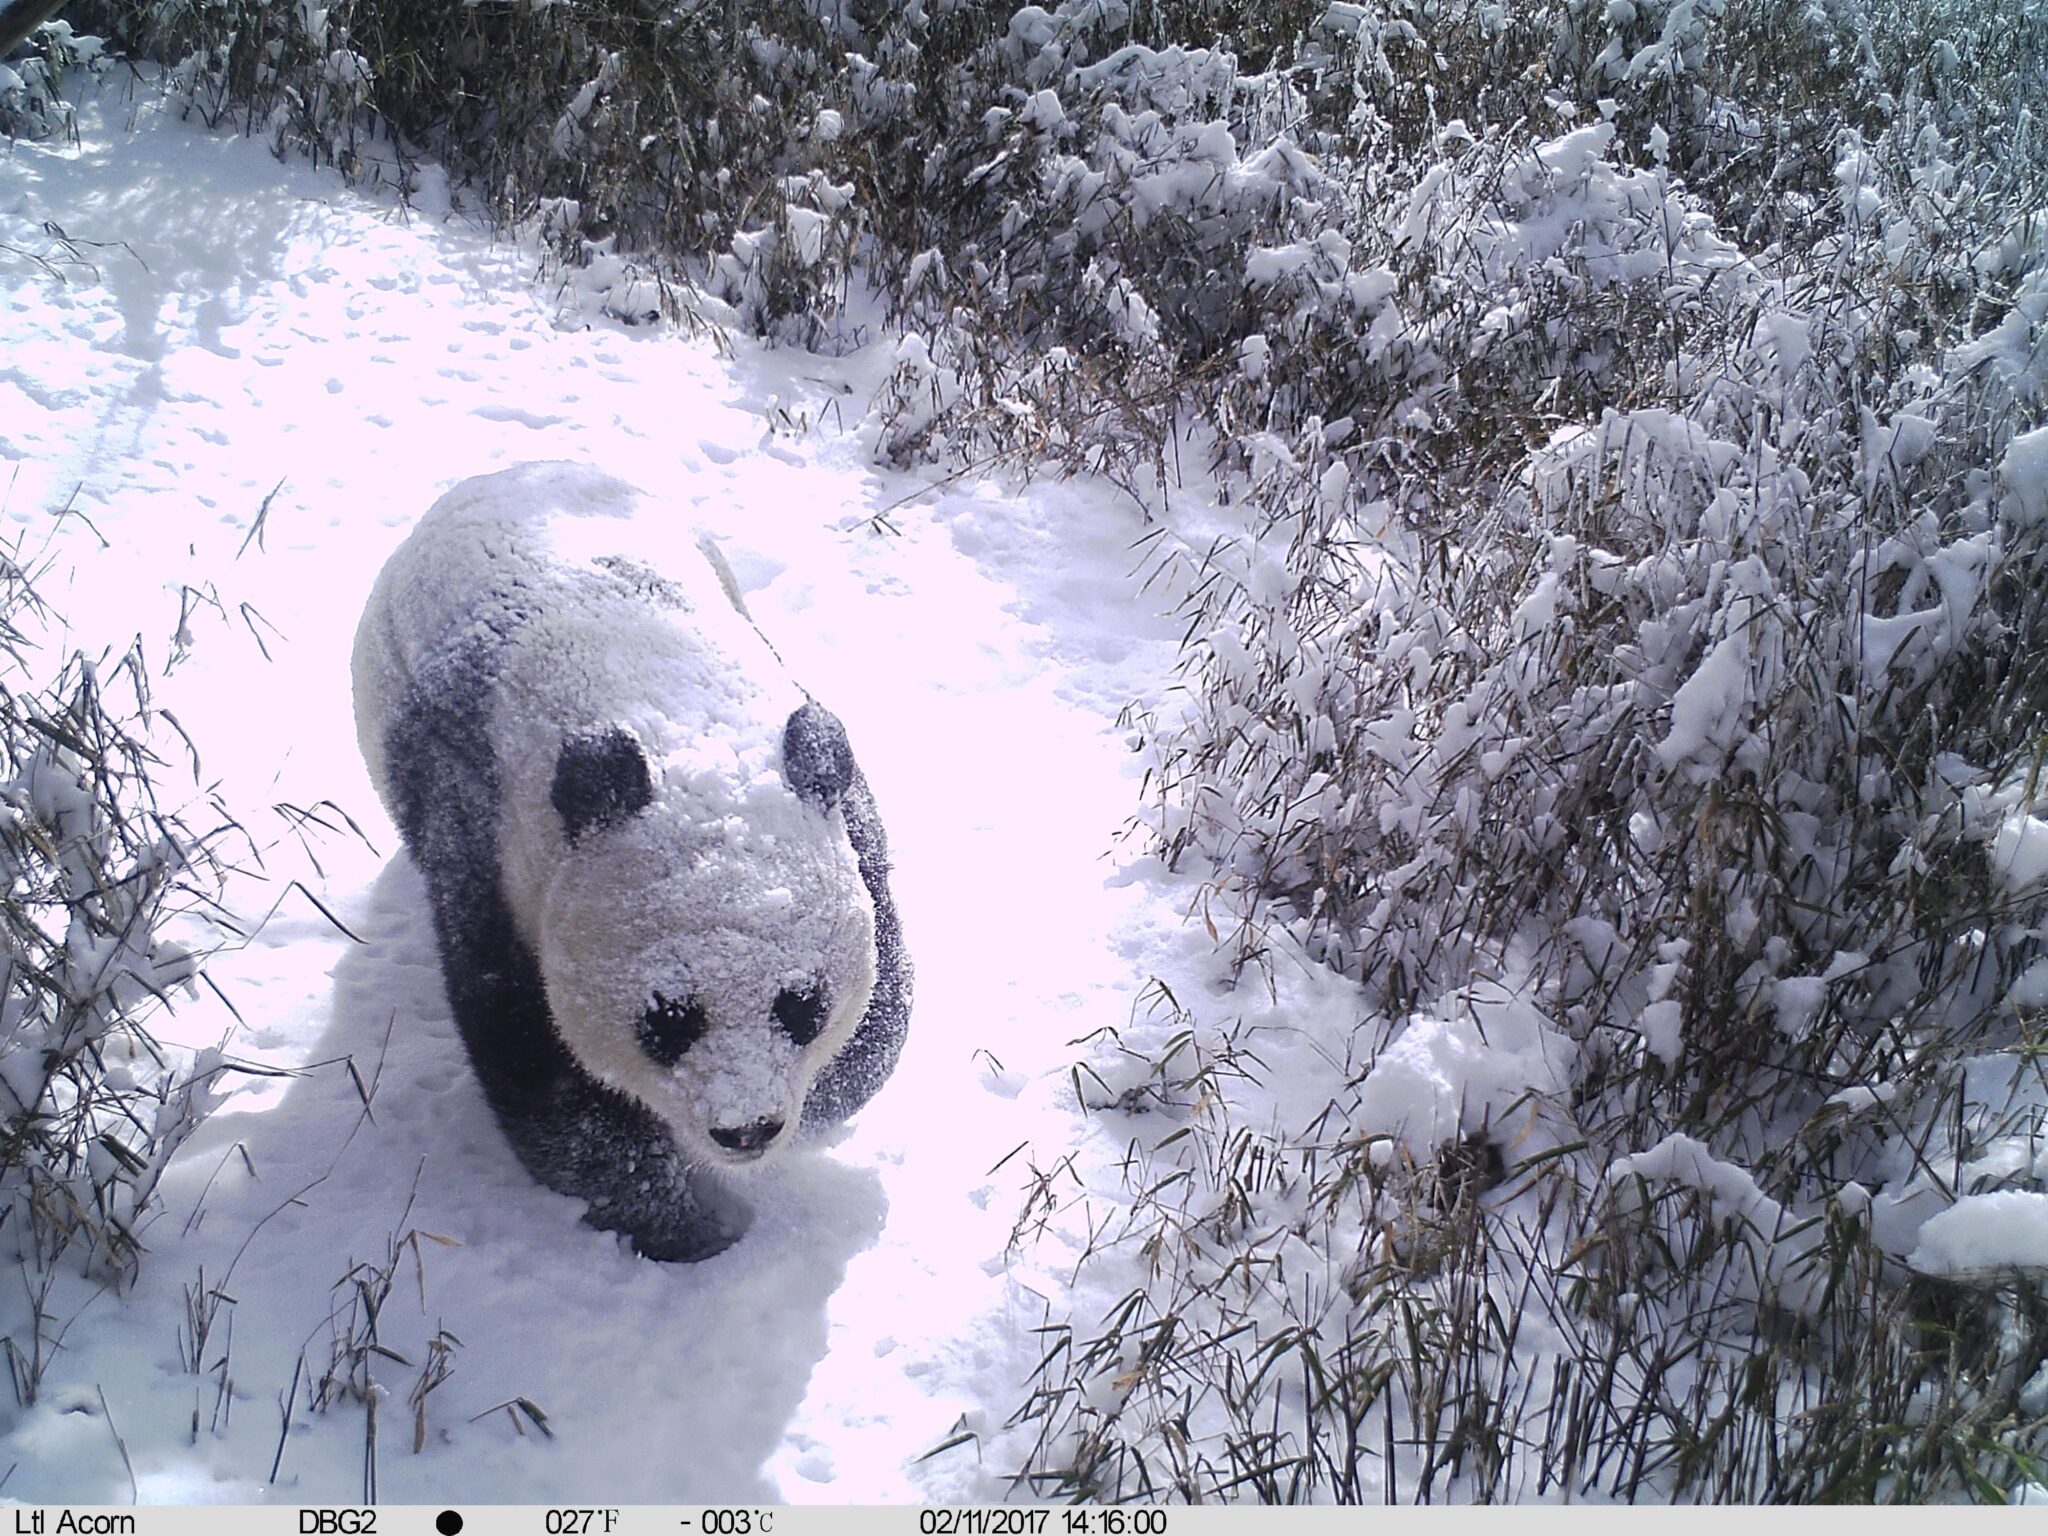 A panda in China's Wolong Nature Reserve.